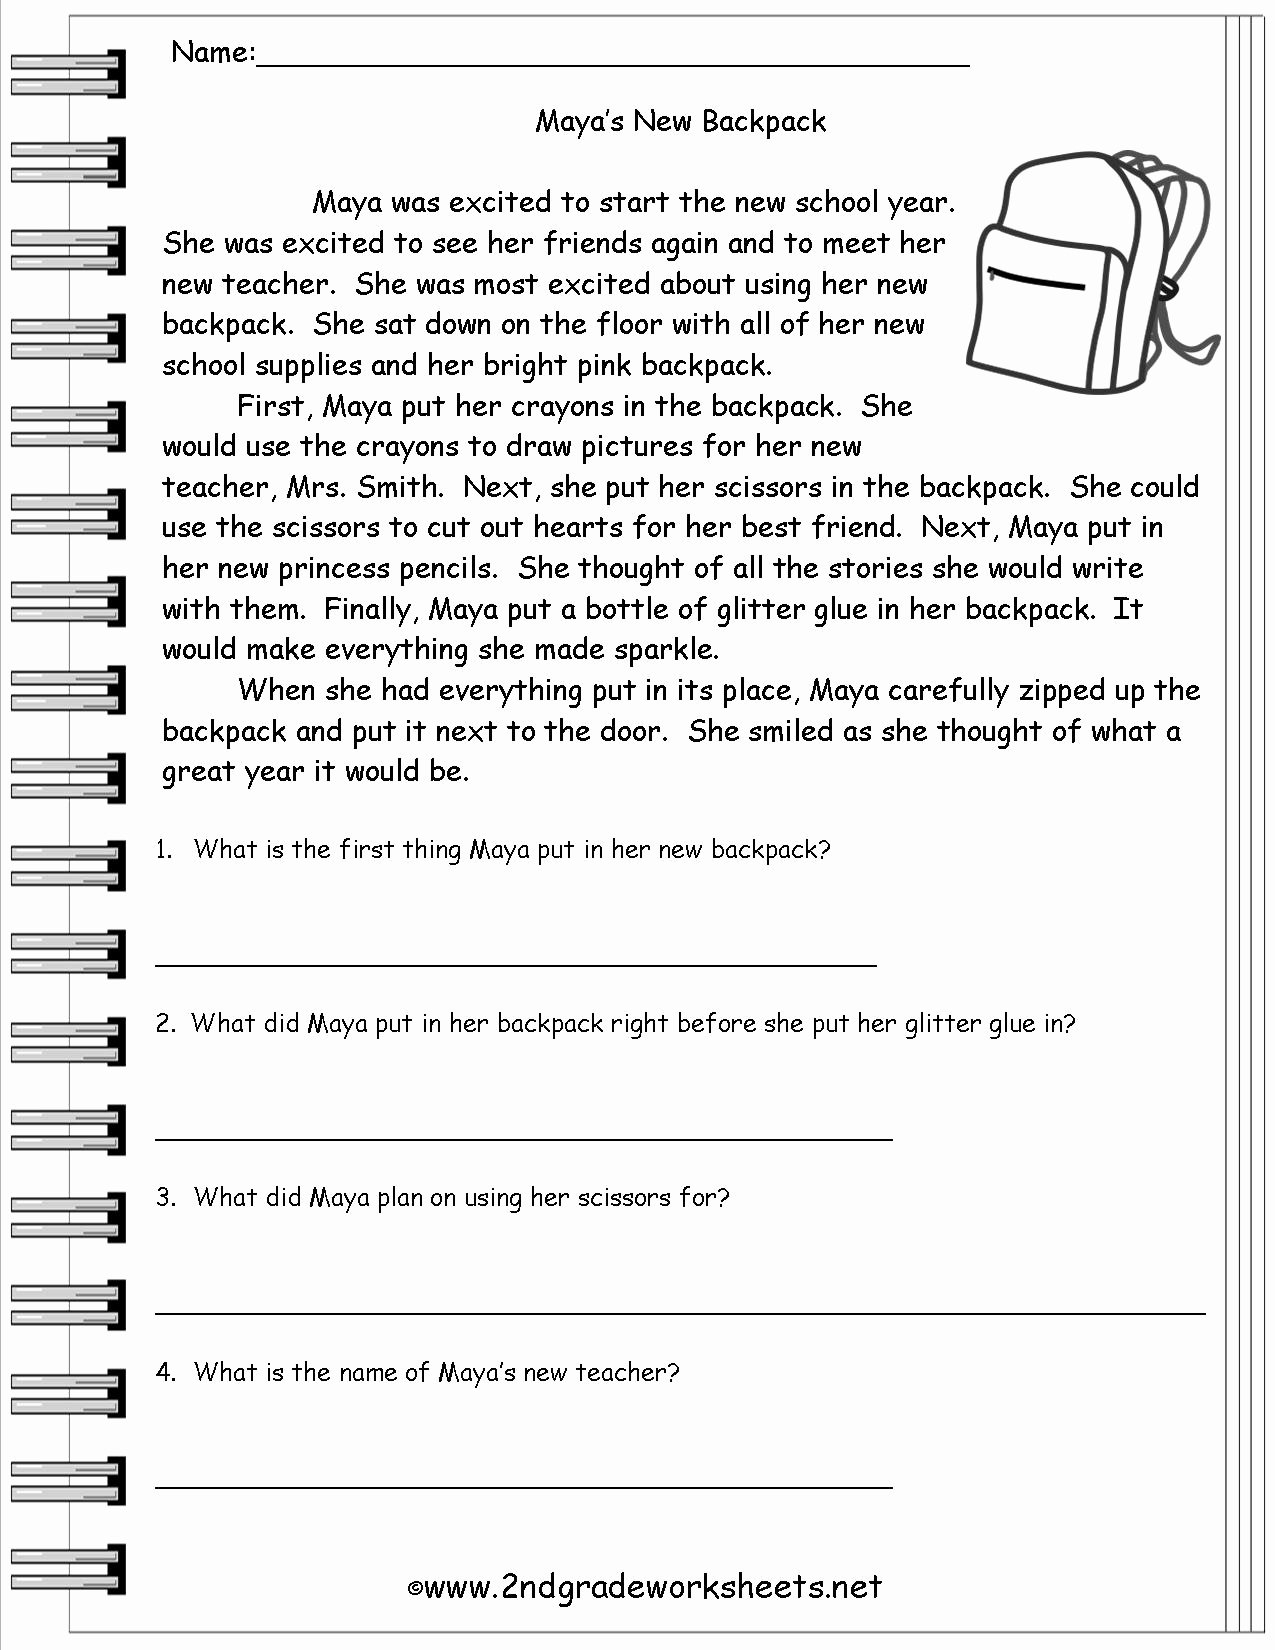 20 Free 4Th Grade Reading Comprehension Worksheets Multiple Choice Along With Reading Comprehension Worksheets 4Th Grade